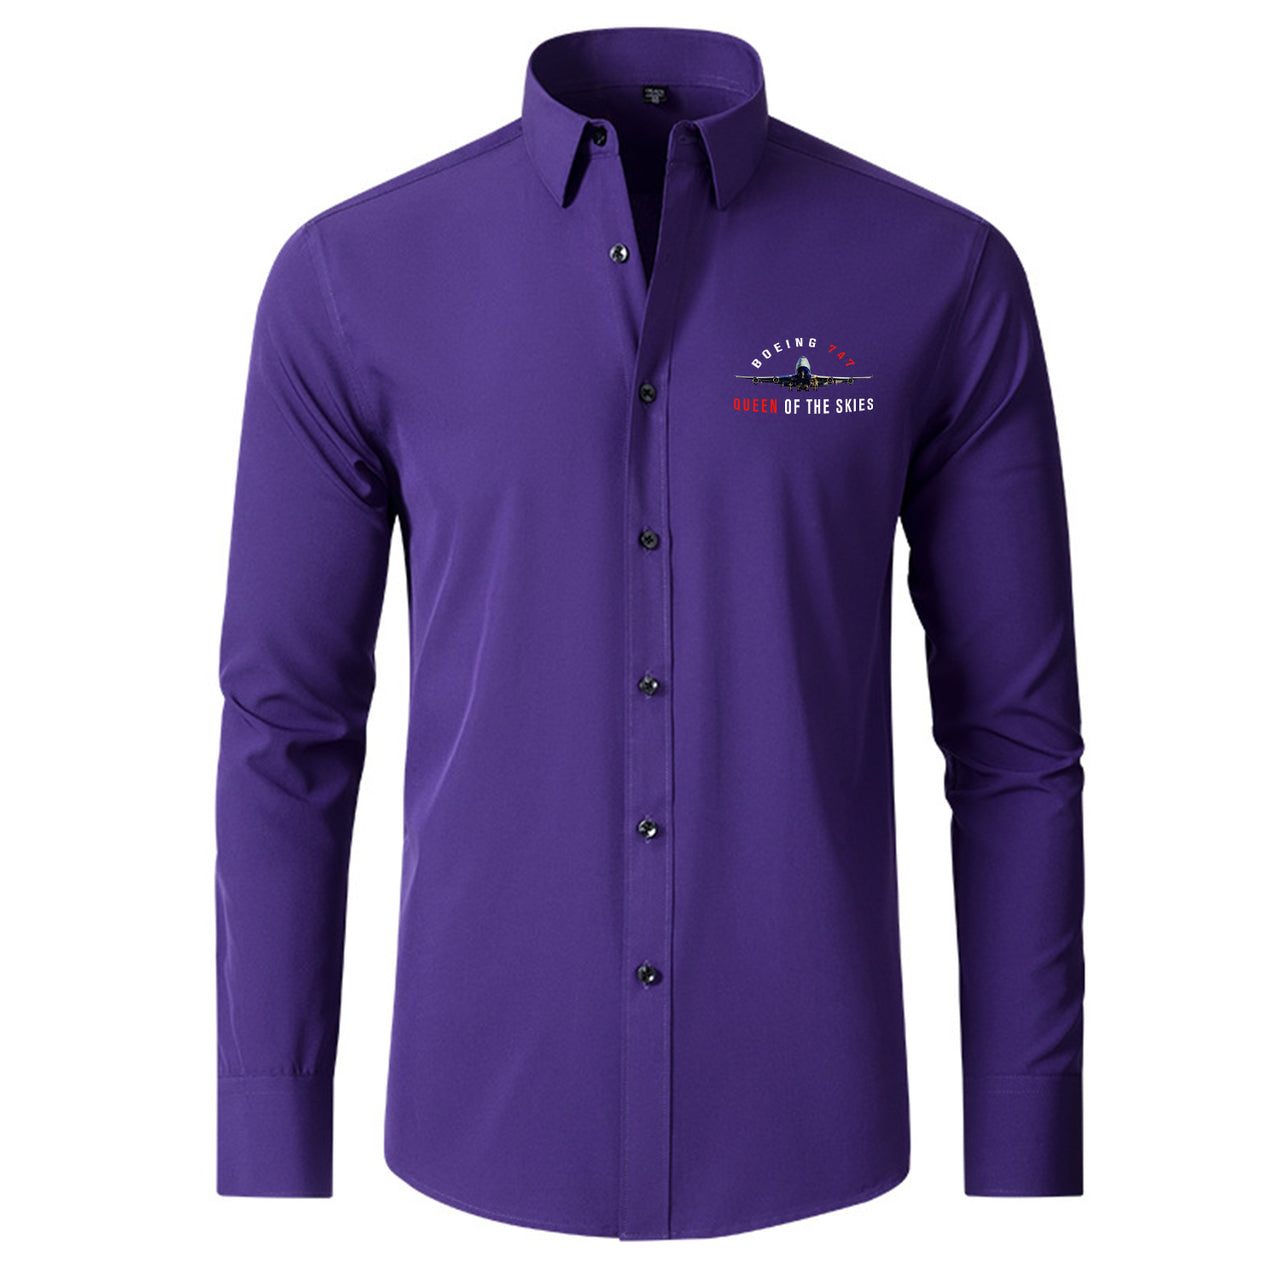 Boeing 747 Queen of the Skies Designed Long Sleeve Shirts